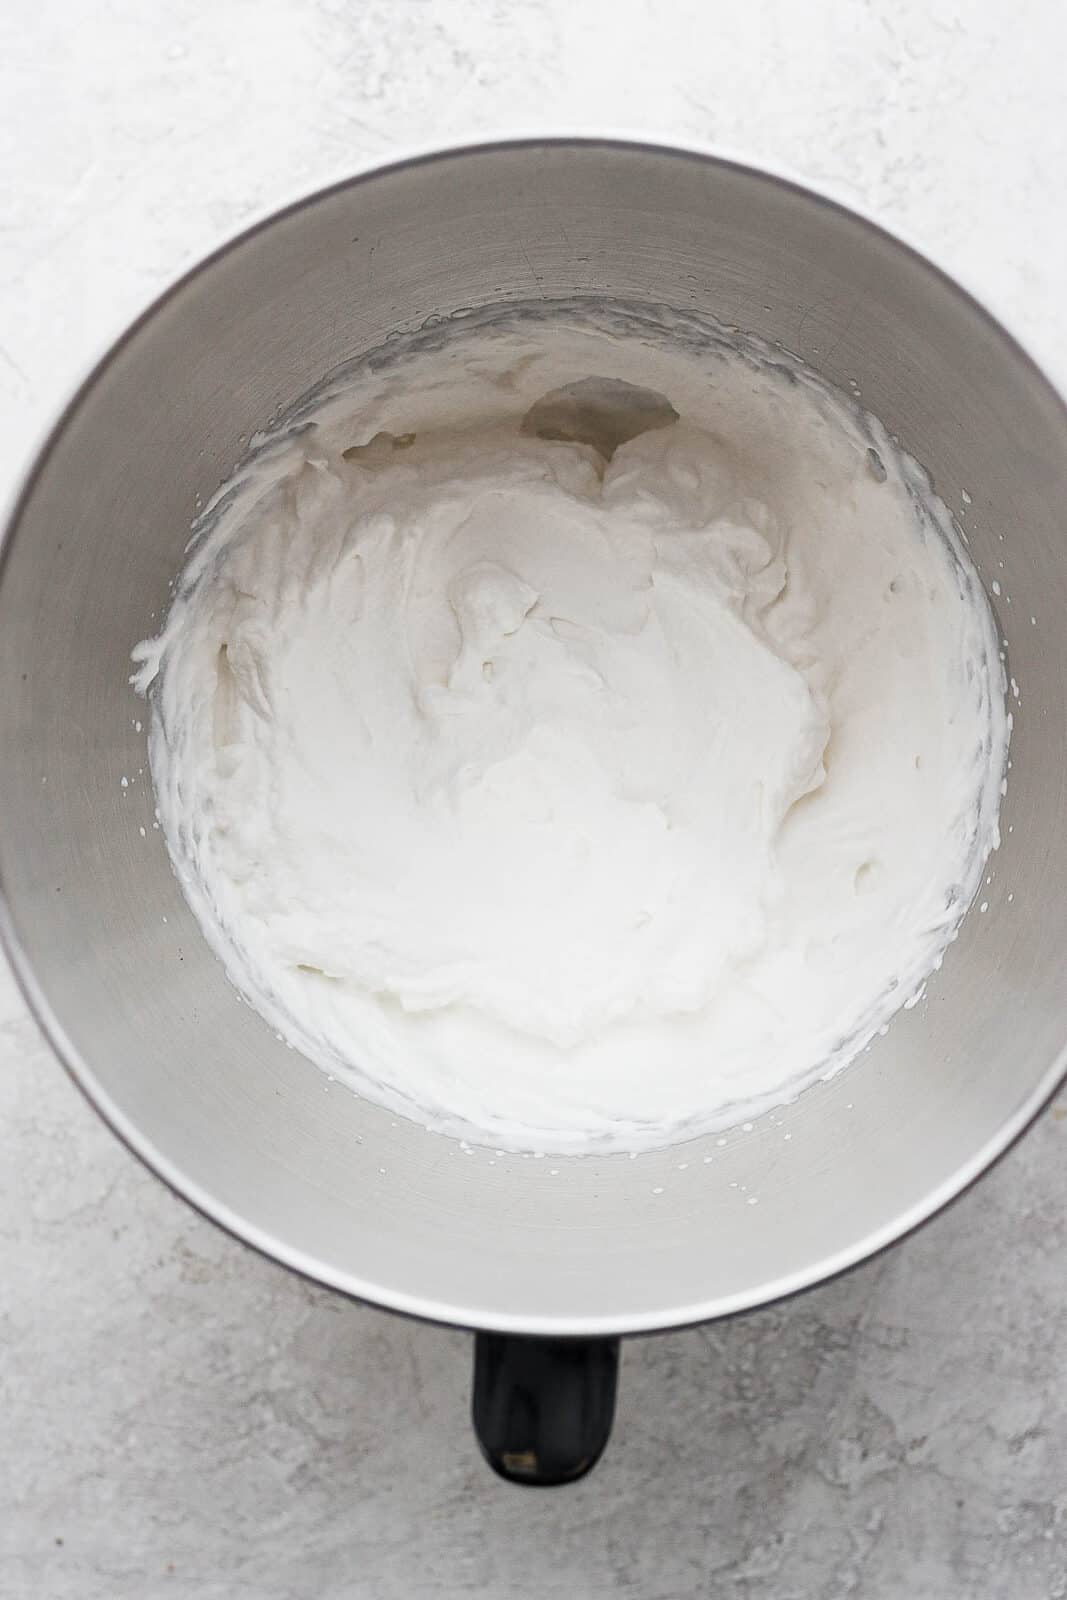 Whipped cream in a chilled mixing bowl.